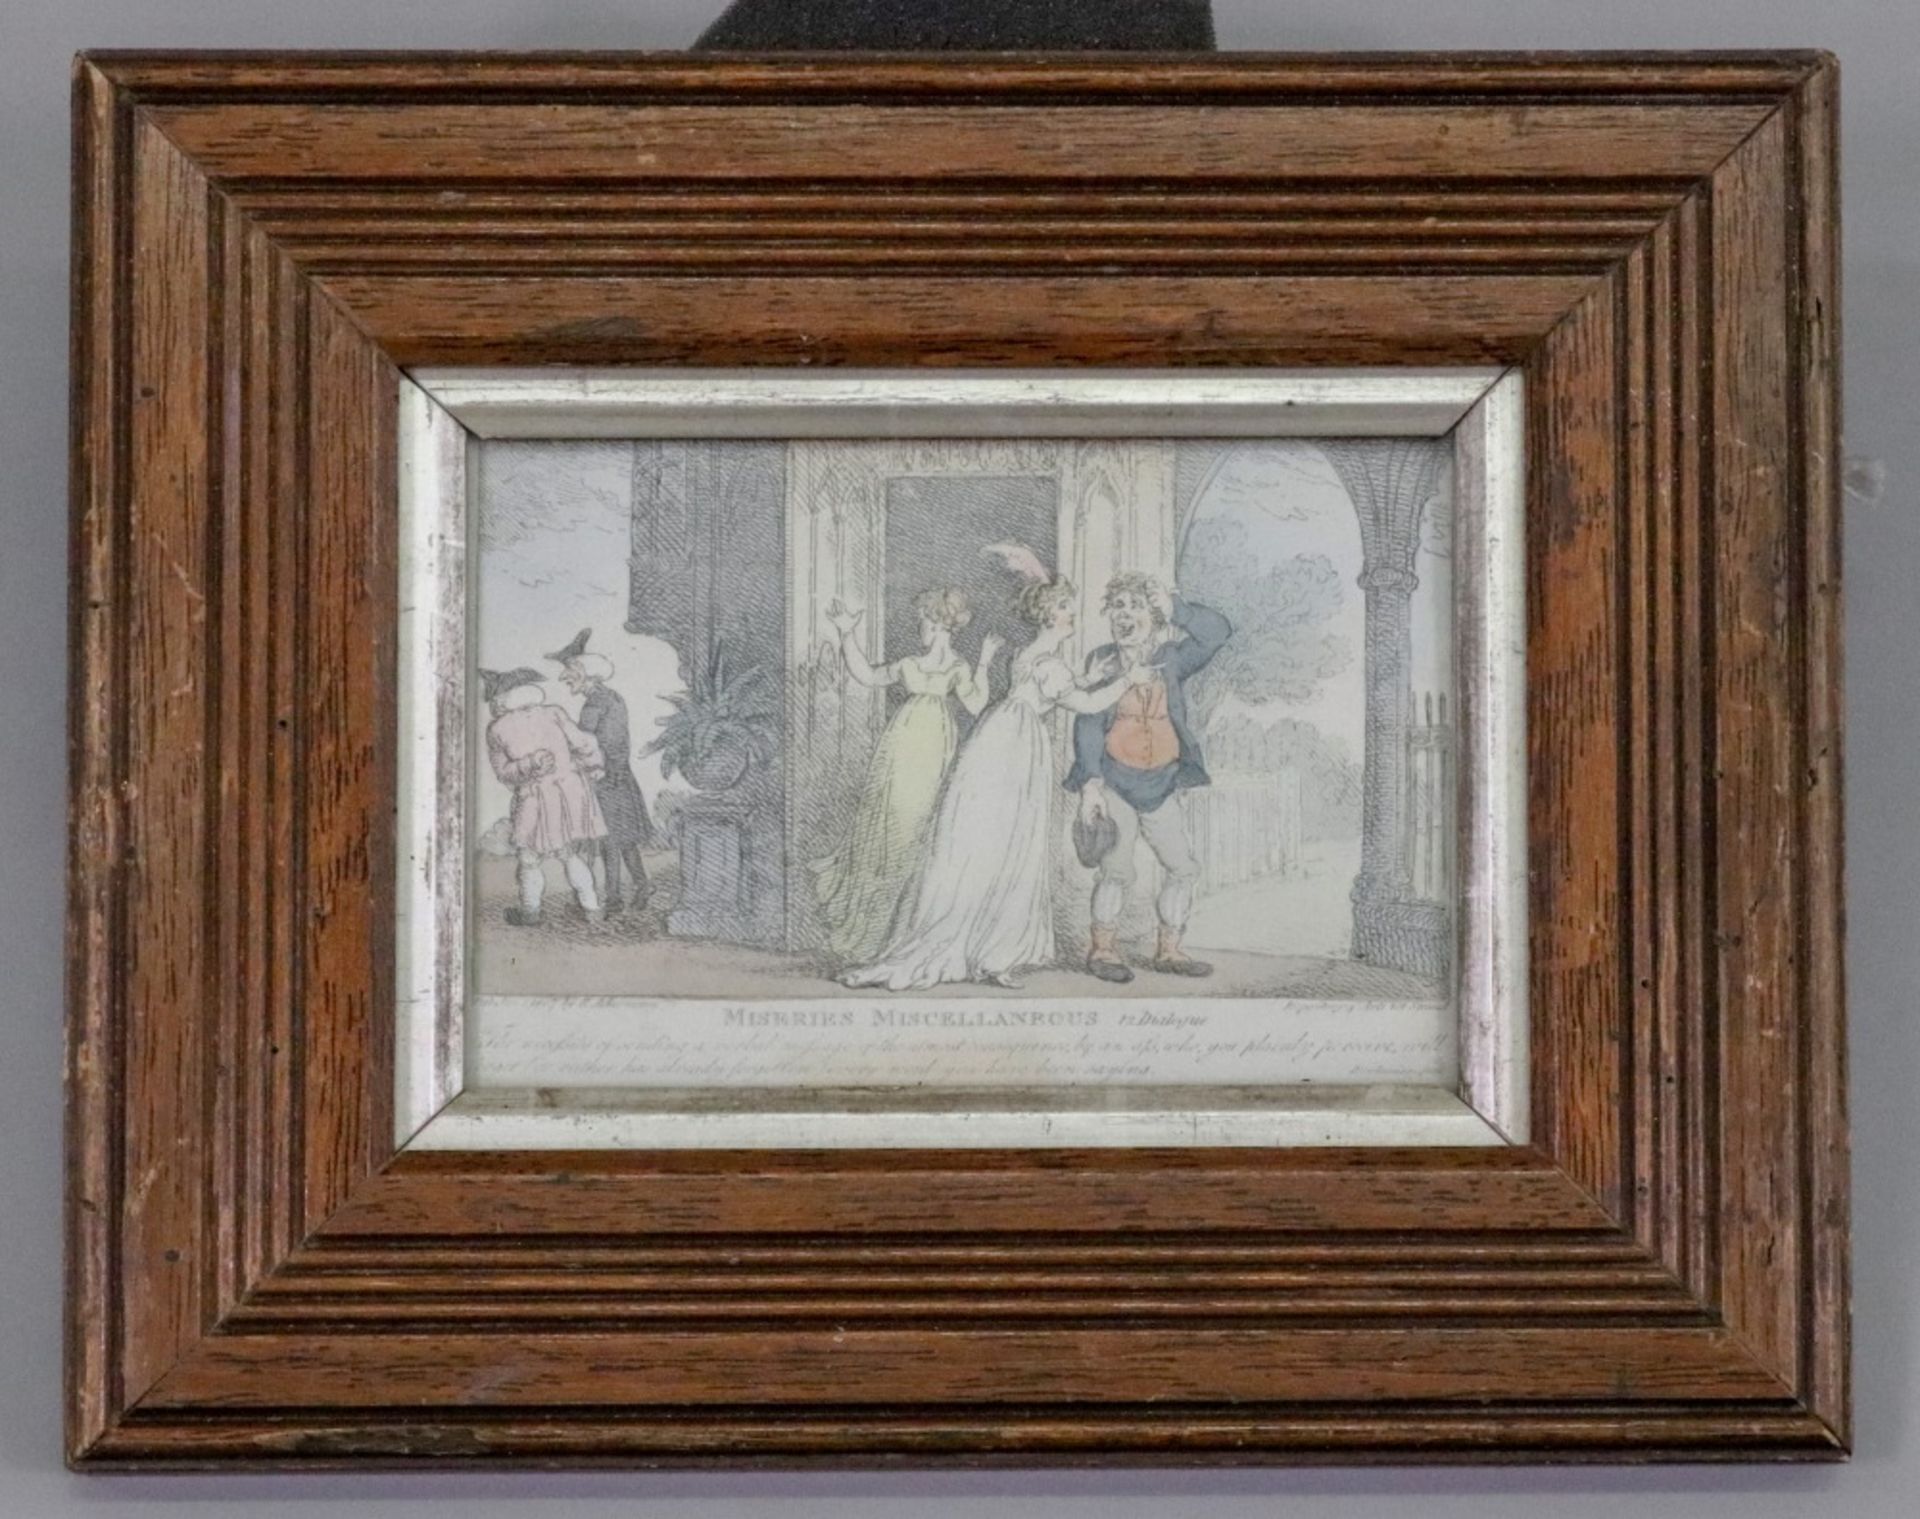 After Thomas Rowlandson, Miseries Miscellaneous, colour engraving, published 1807 by R. - Image 2 of 2